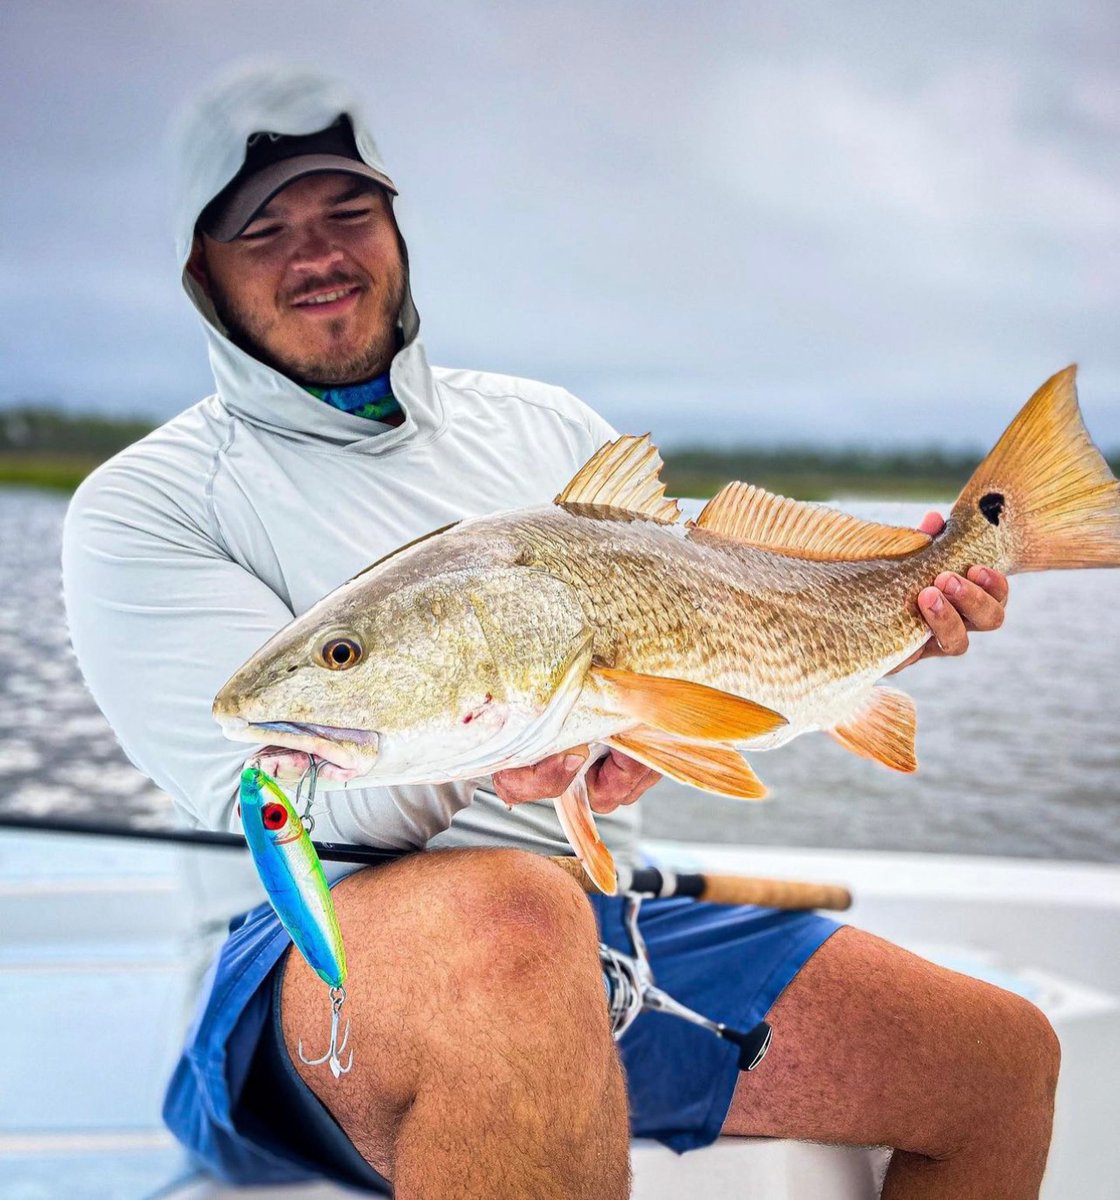 💥 FSF Catch of the Week! 💥 Gorgeous #redfish caught by @old_city_sportsman. 
⁠
⁠⁠Anglers, send us your fishing photos/videos via DM on IG or FB for a chance to be featured on our page EVERY WEEK!⁠

#redfishing #floridafishing #fishflorida #gamefishing #trophyfishing